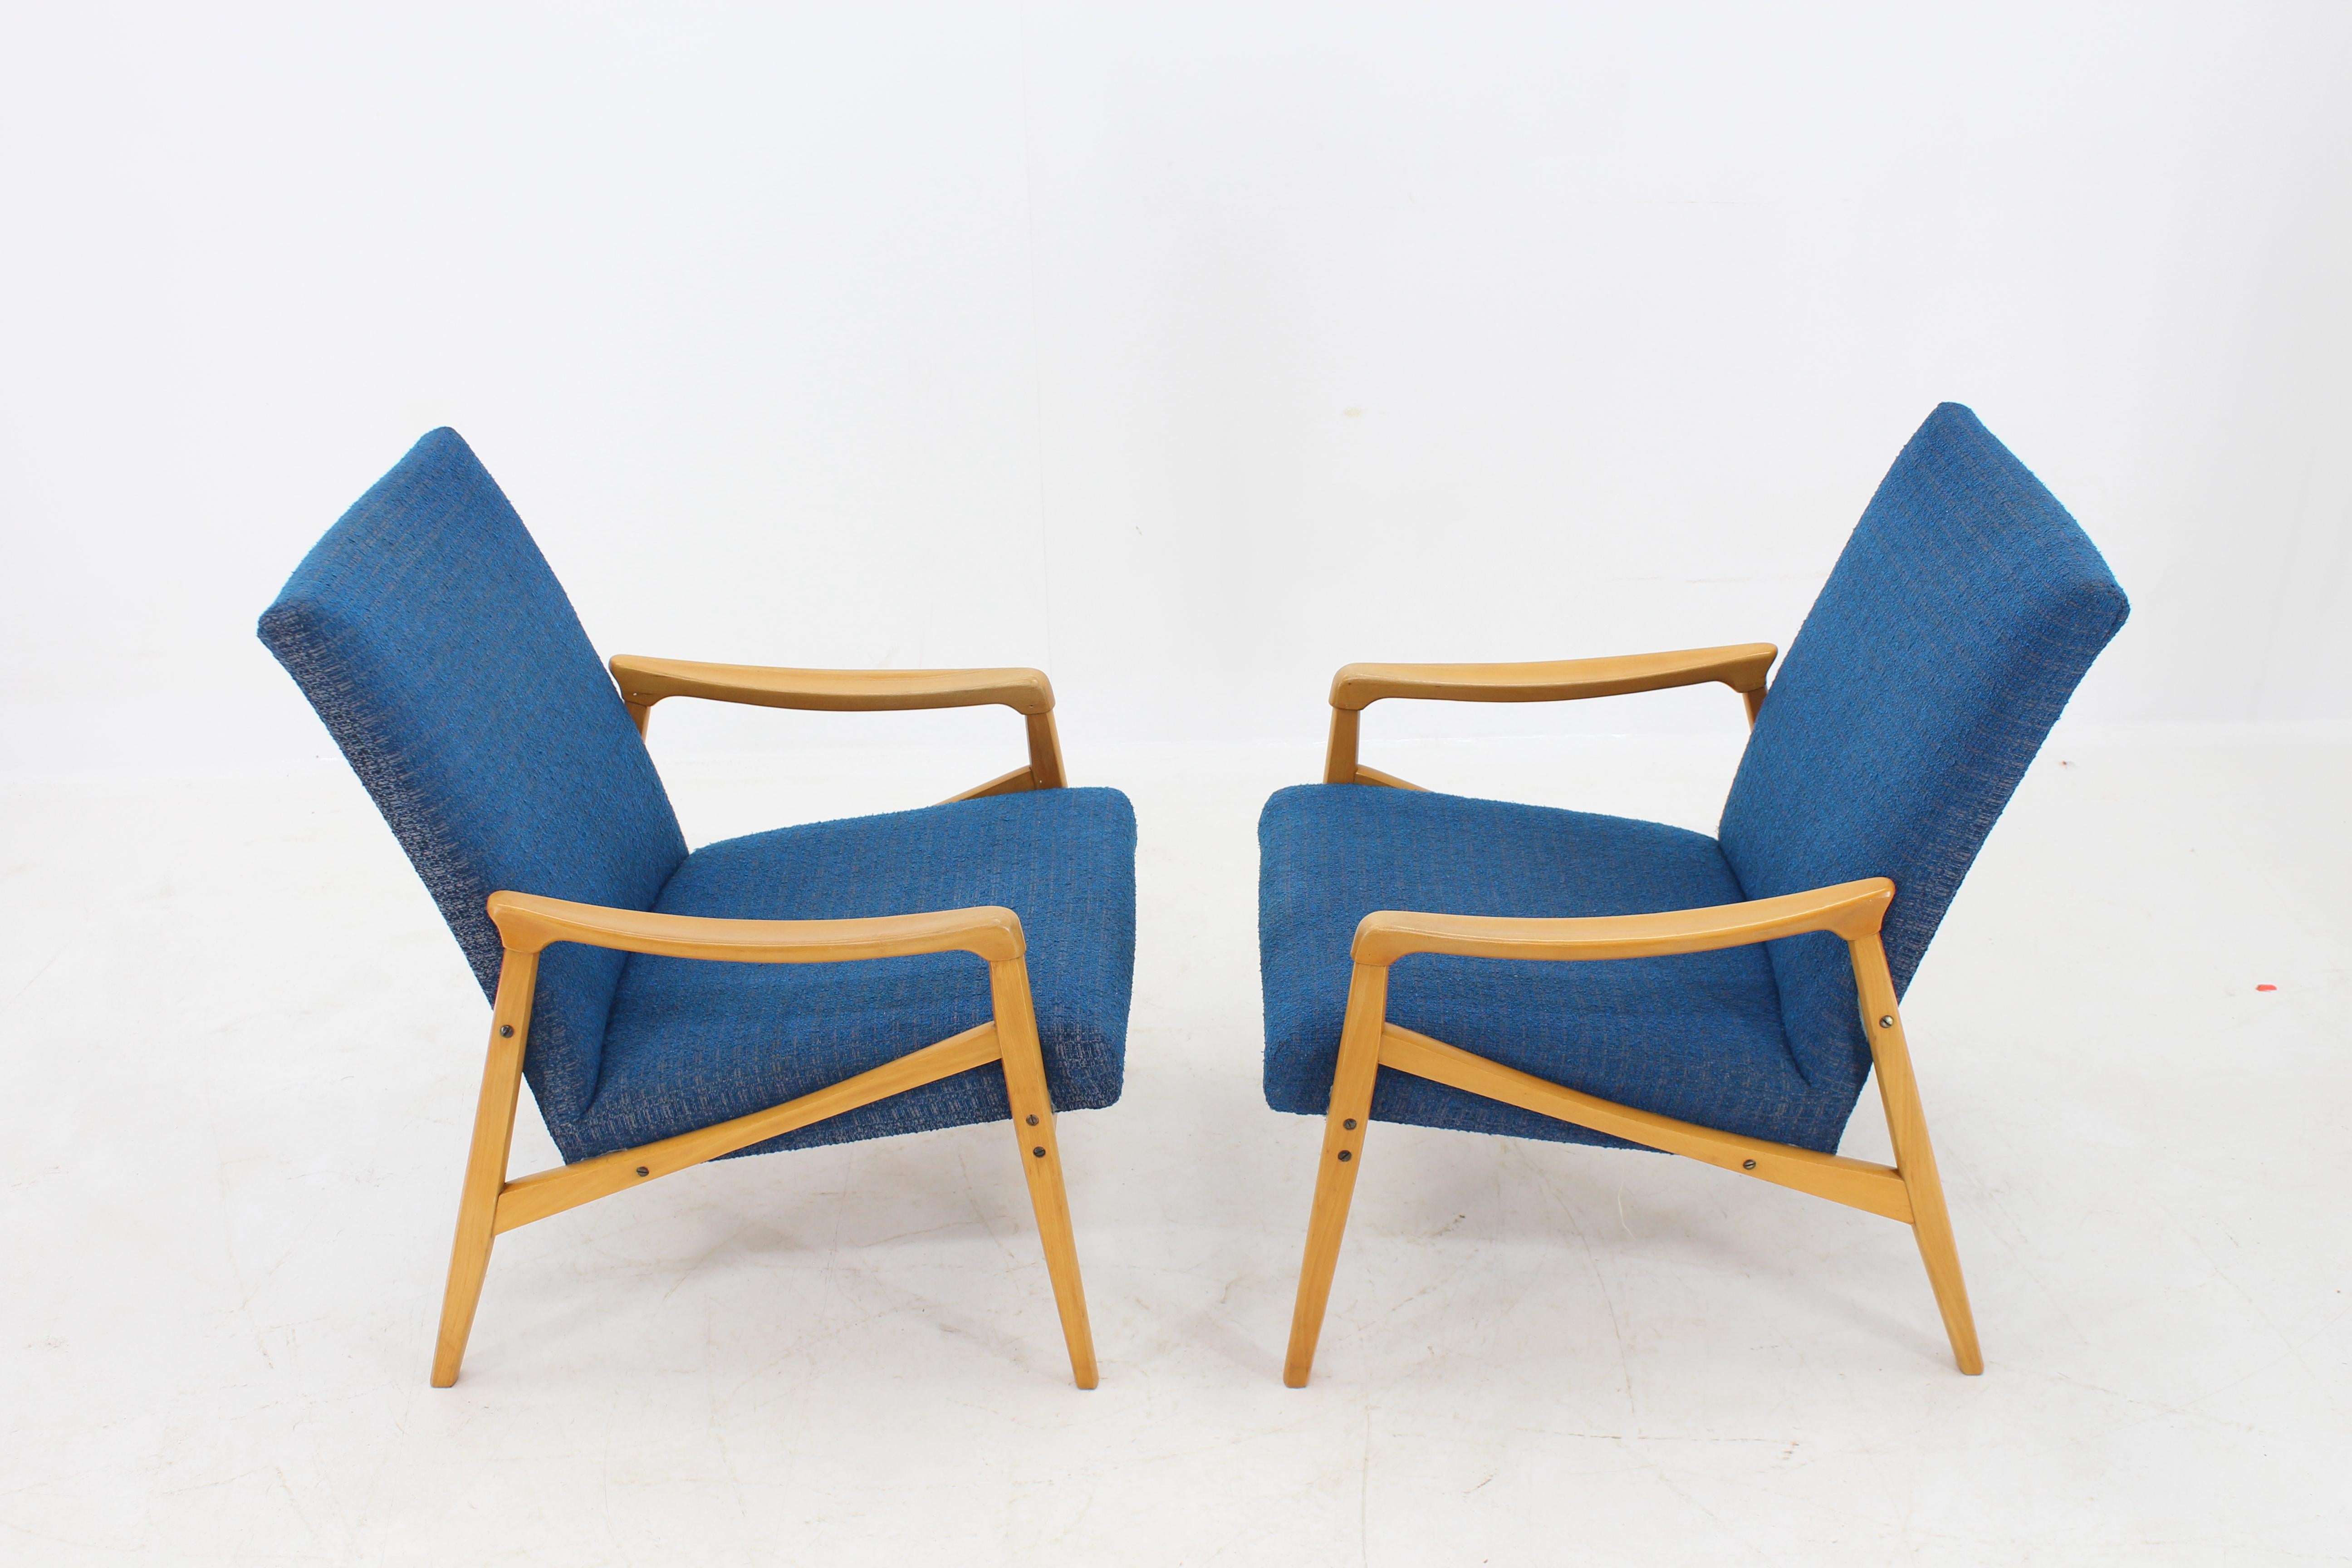 Made in Czechoslovakia
Made of wood, fabric
Wooden parts has been refurbished
Original upholstery
Original condition.